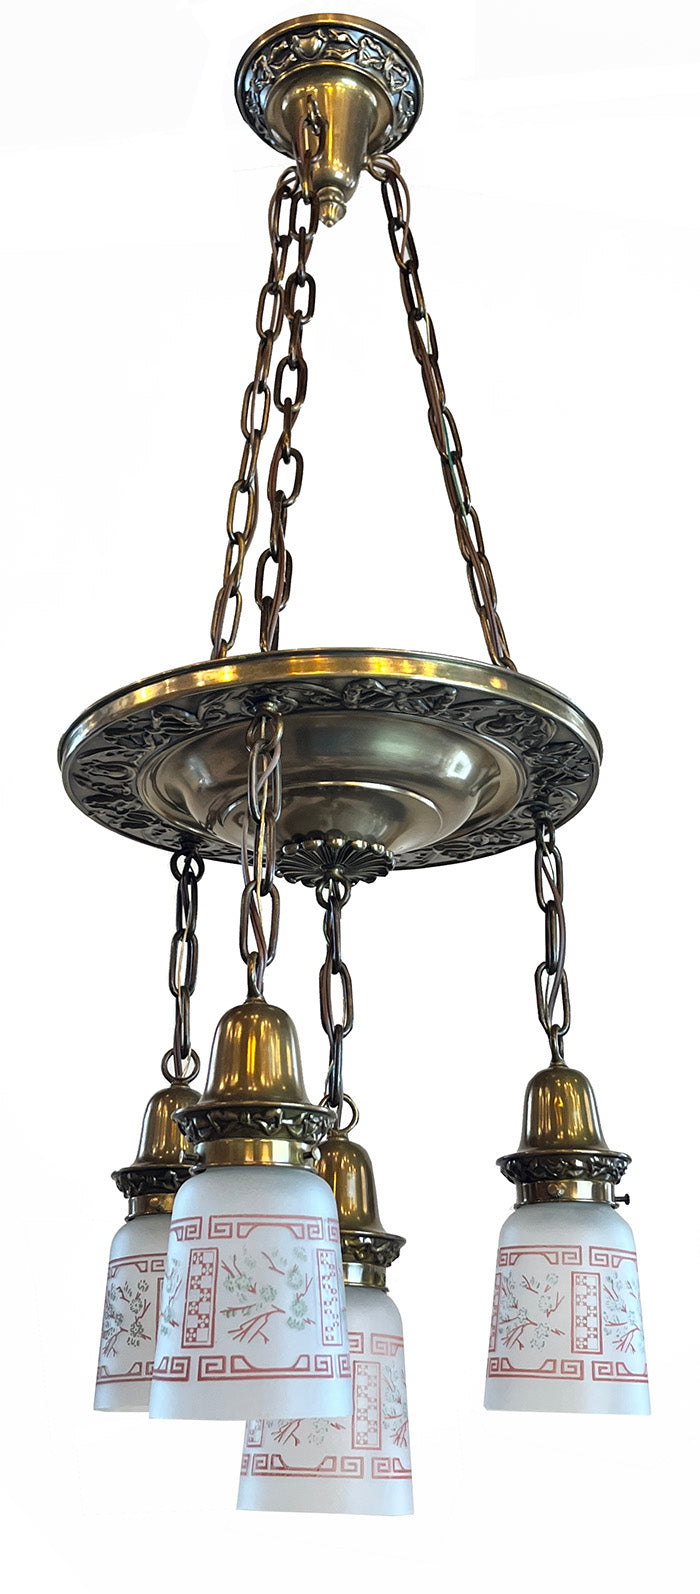 Antique Circa 1920 Four Light Cascade with Embossed Wreath and Ribbon Center Pan and Antique Etched Asian Patterned Shades